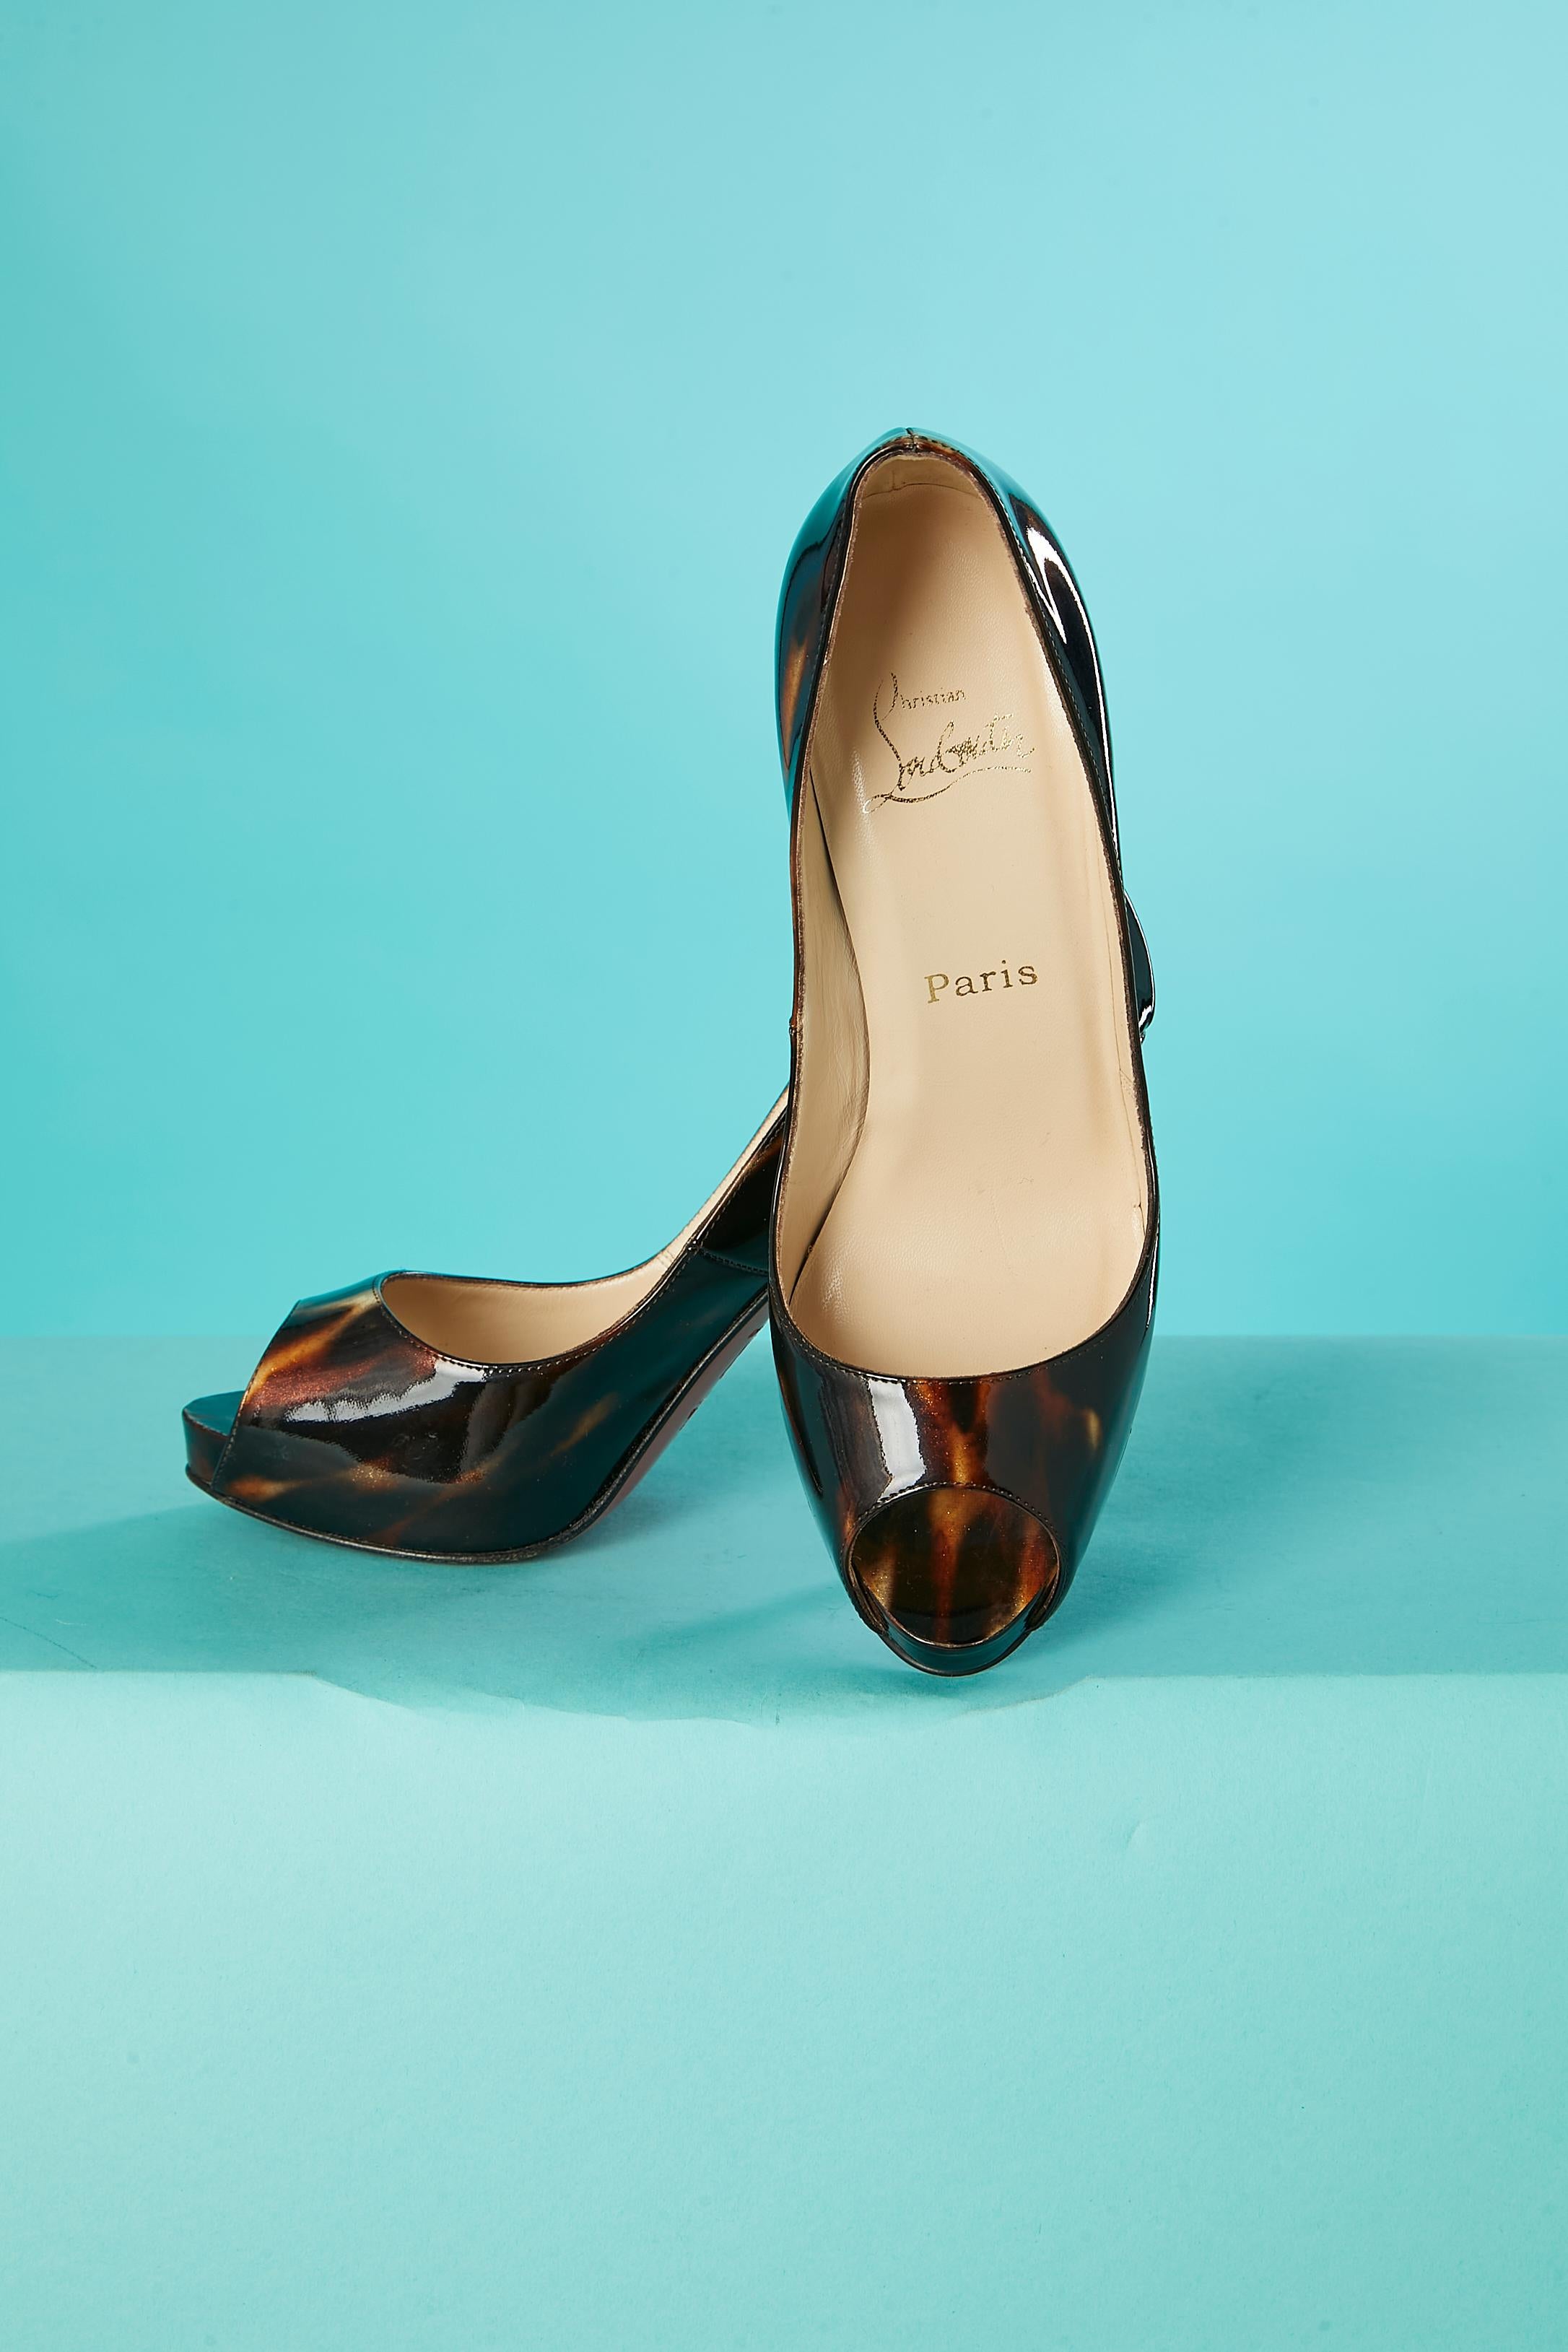 Open-toe pump in patent leather with turtle shell pattern Christian Louboutin  In Excellent Condition For Sale In Saint-Ouen-Sur-Seine, FR